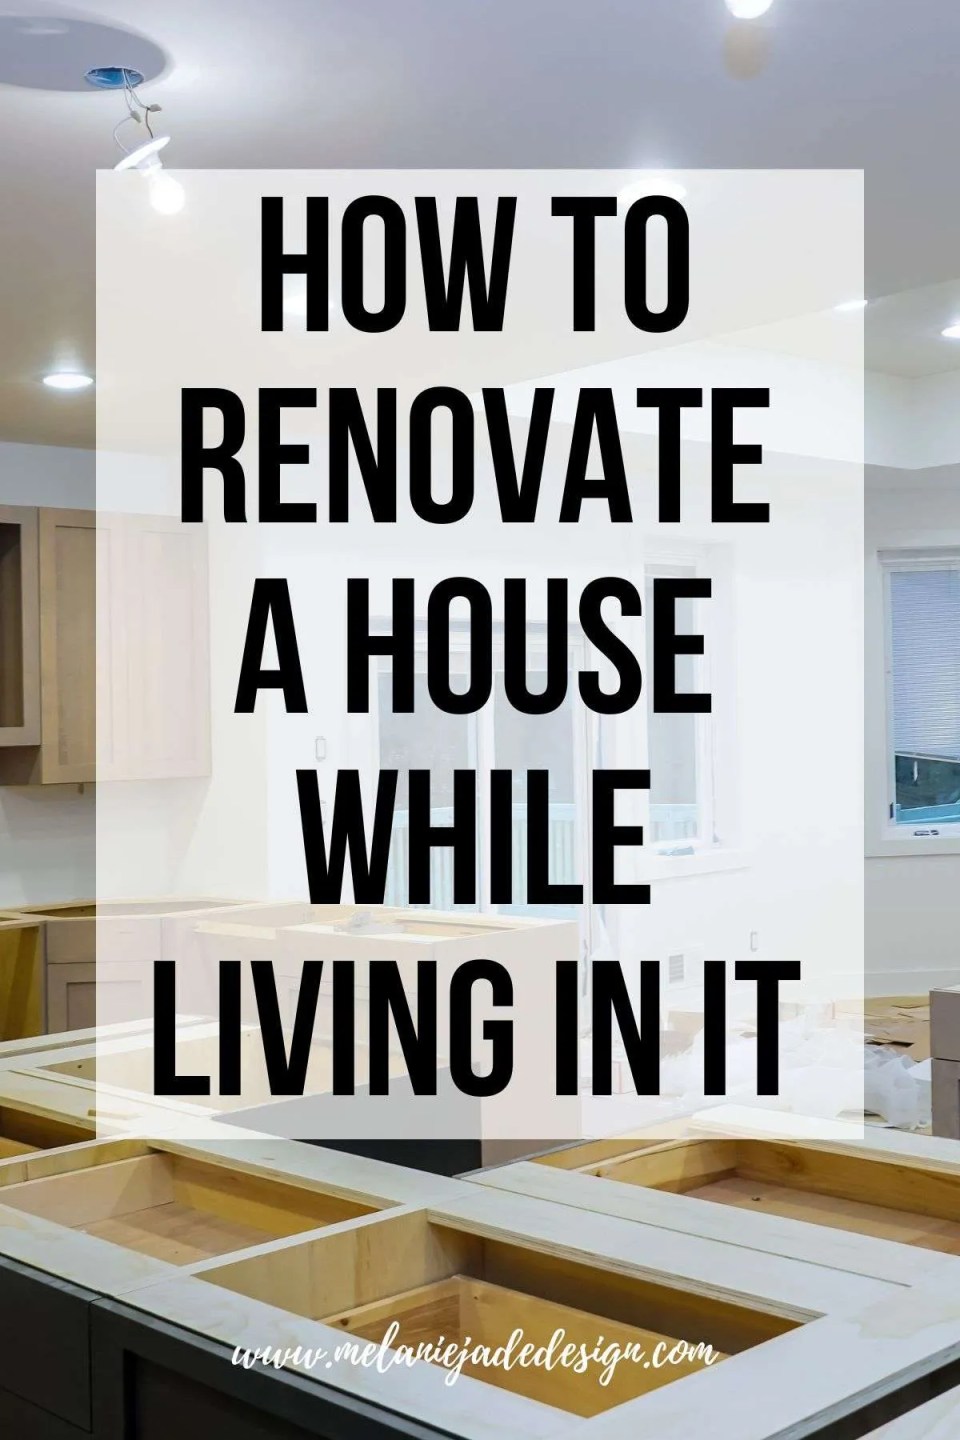 How to Renovate a House While Living In It - 8 Tips and Tricks Pinterest pin